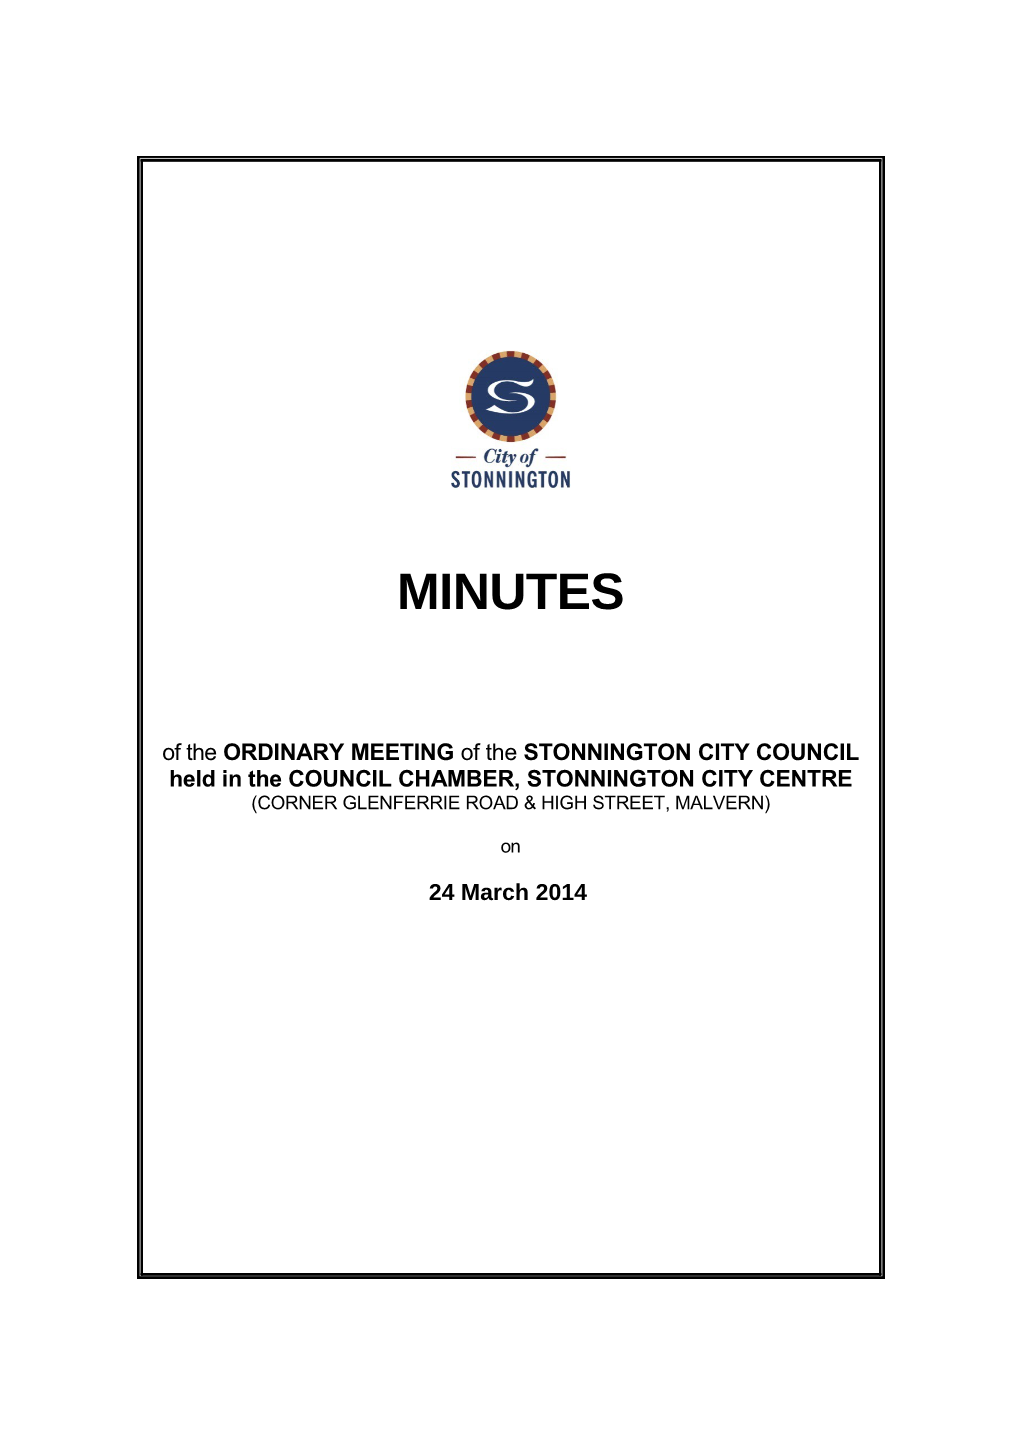 Minutes of Council Meeting - 24 March 2014